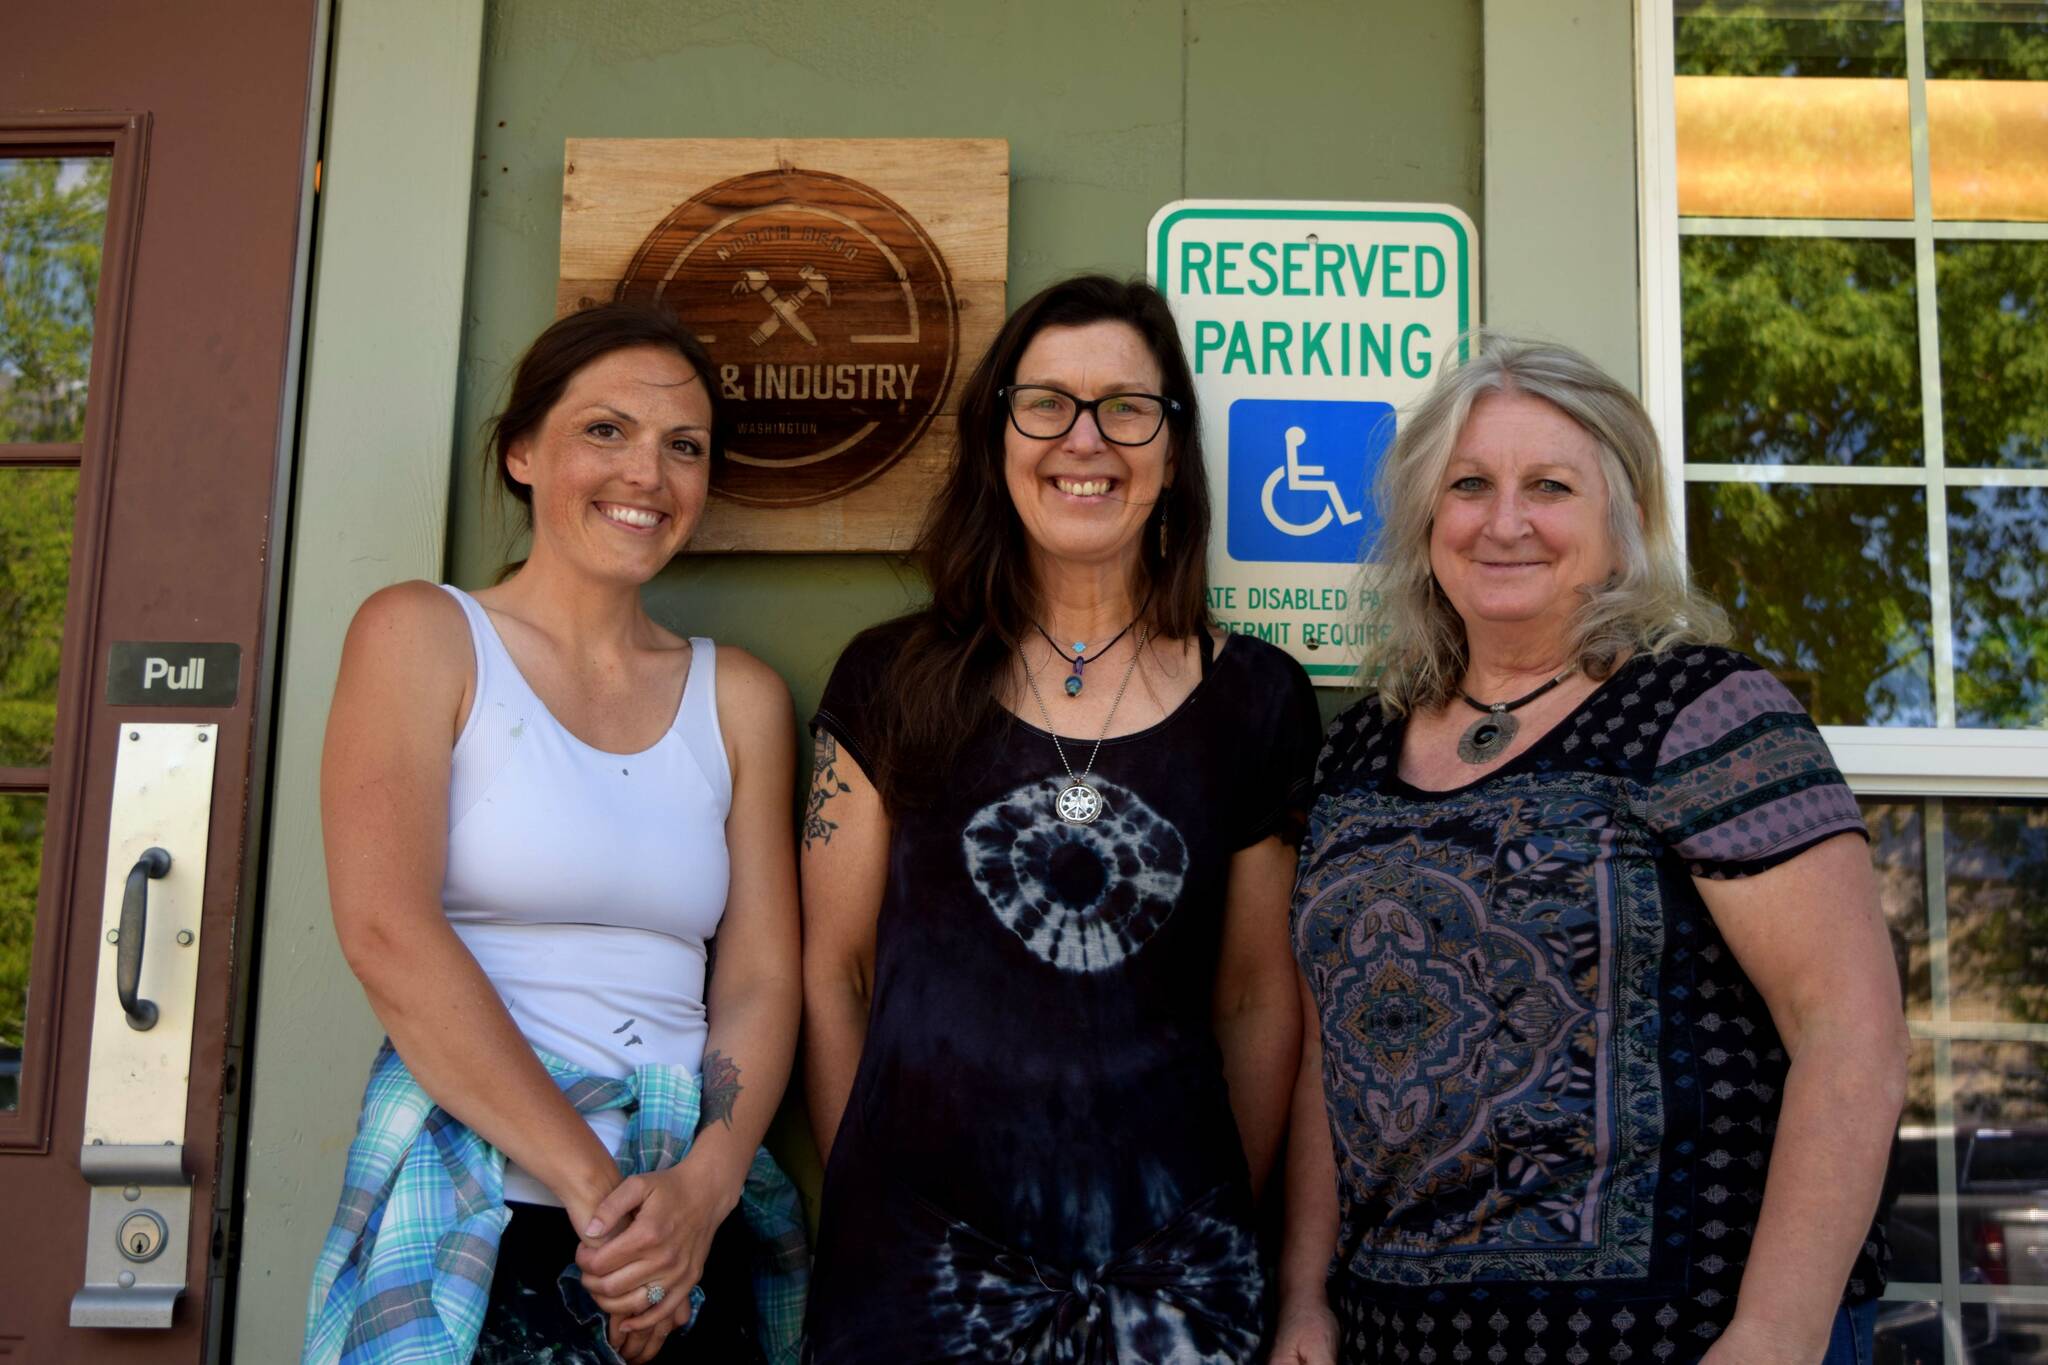 Photos by Conor Wilson/Valley Record.
Members of North Bend Art & Industry pose for a photo outside their new space in downtown North Bend. From left: Sarah Hughes, Ellen Rowan, Deb Landers.